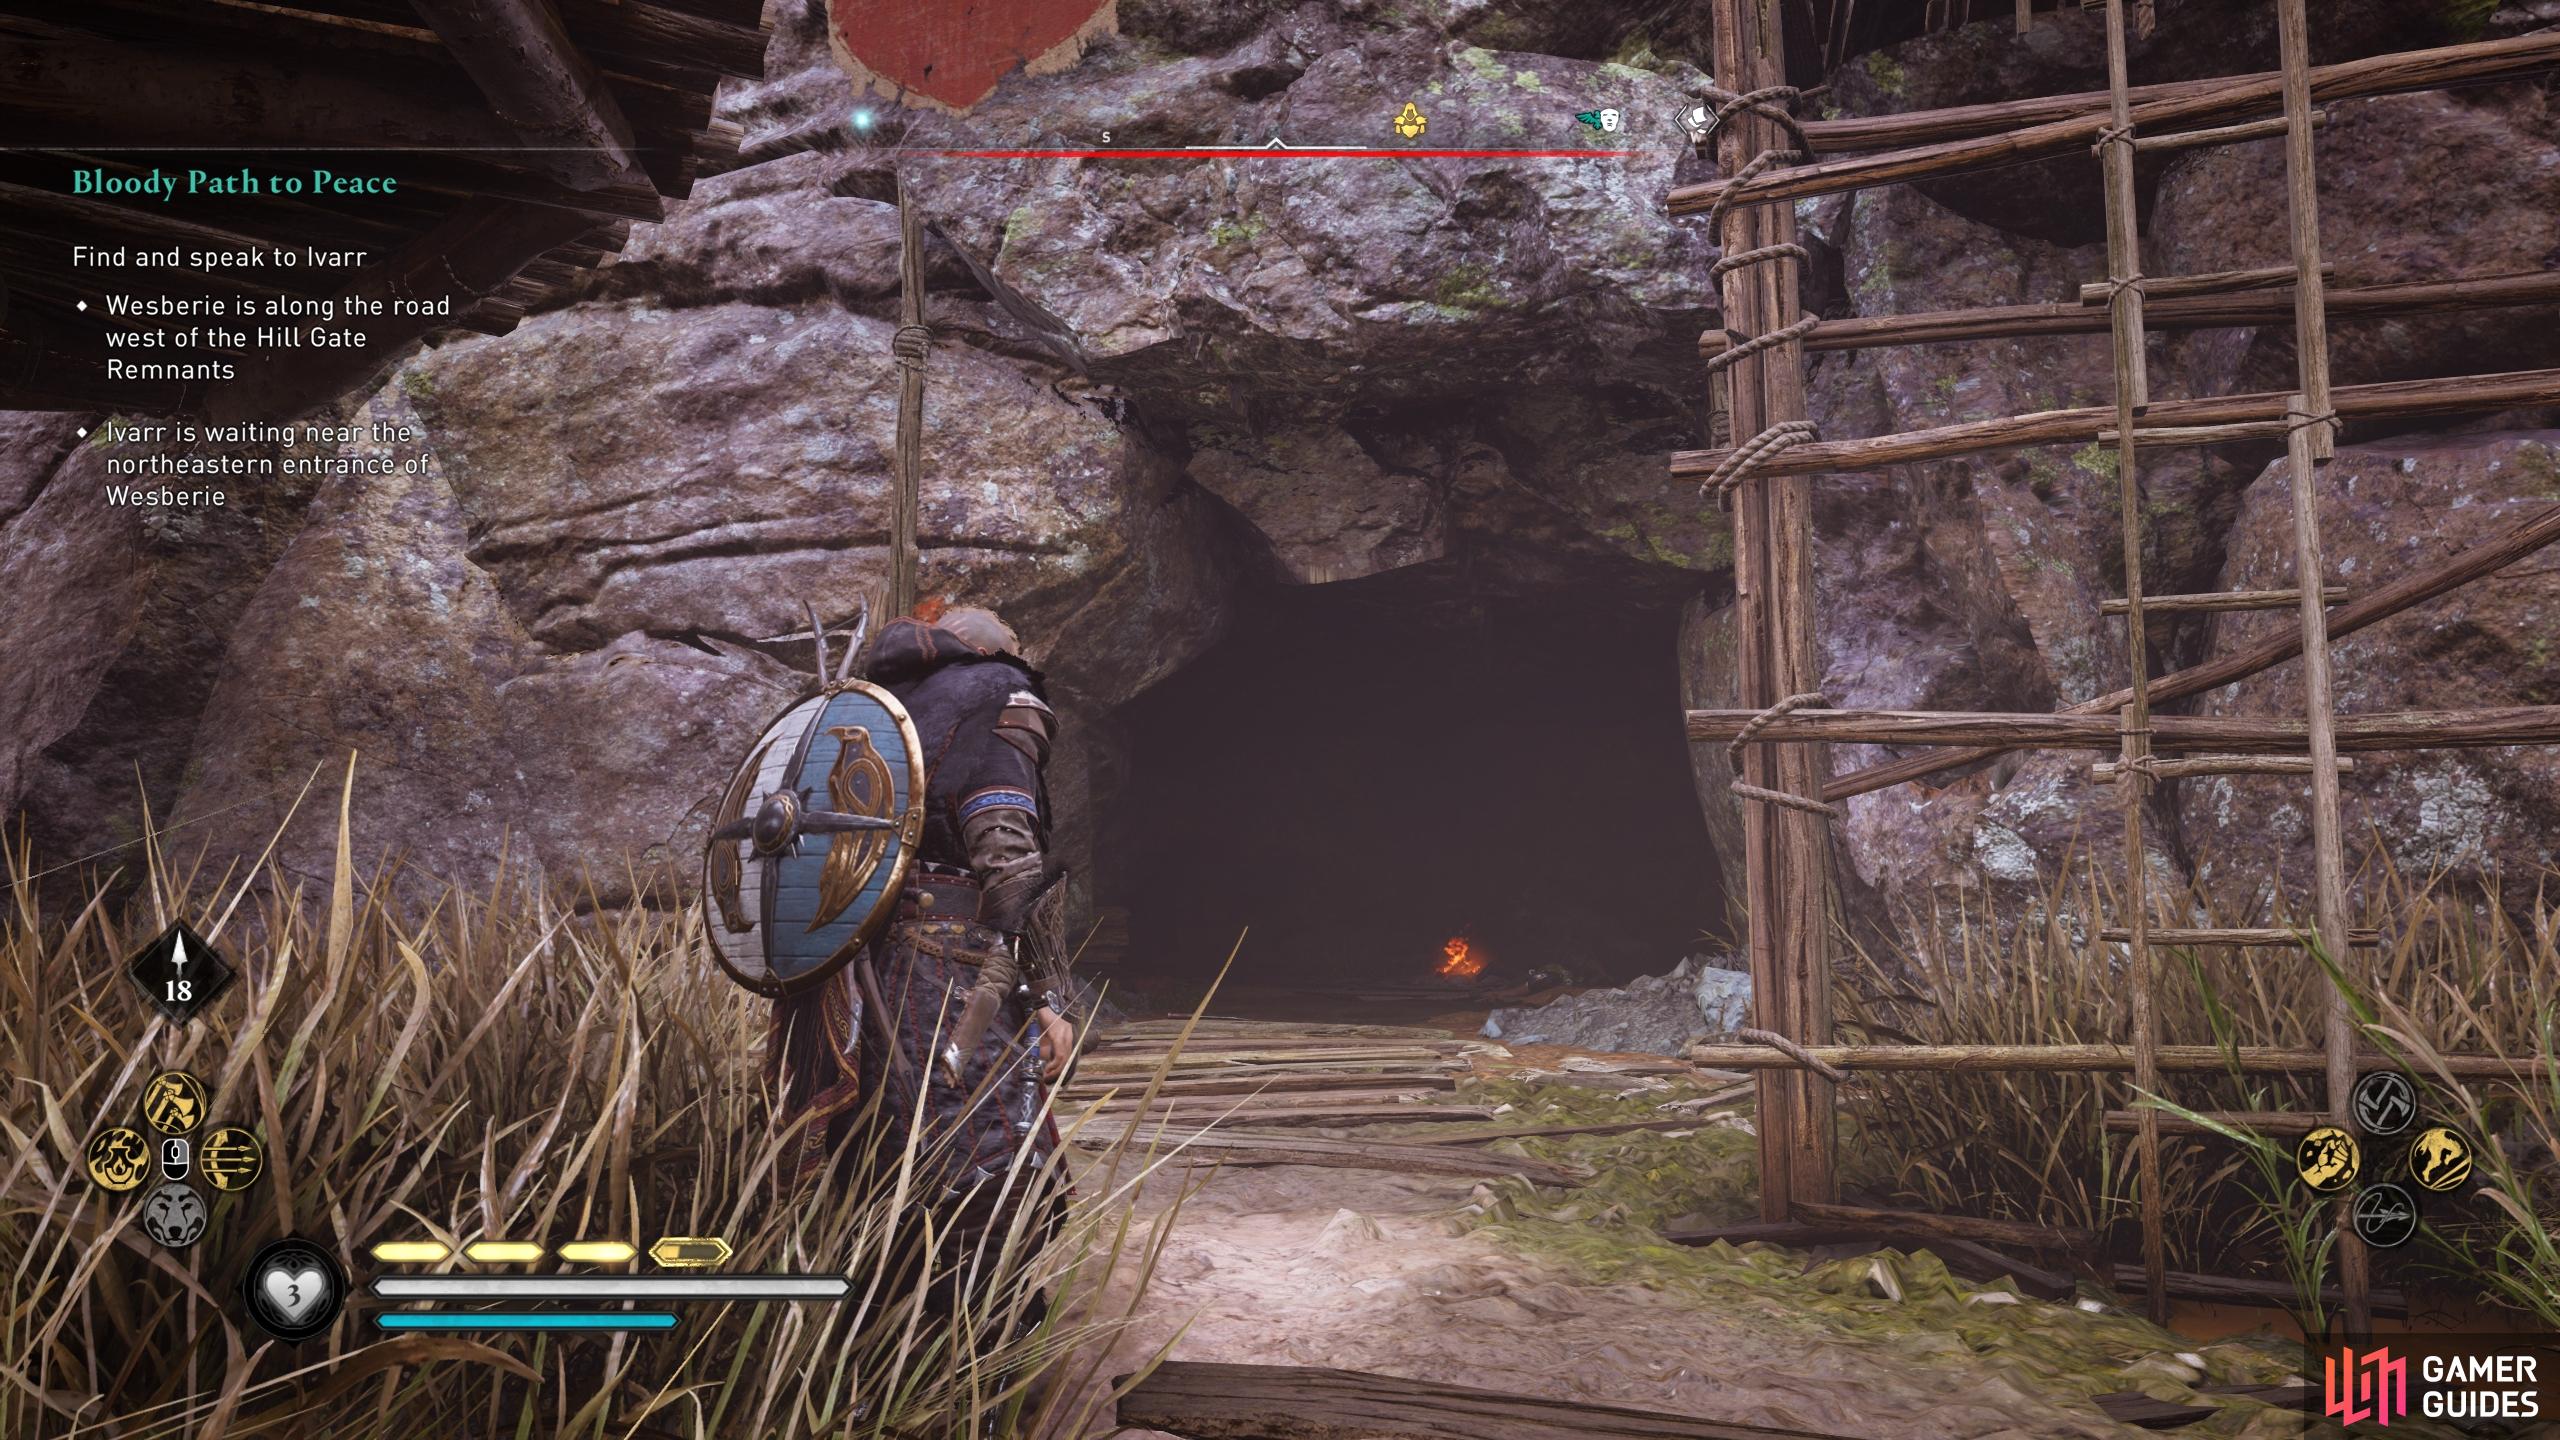 The entrance to the cave where you'll find the treasure chest containing the Brigandine Helm.